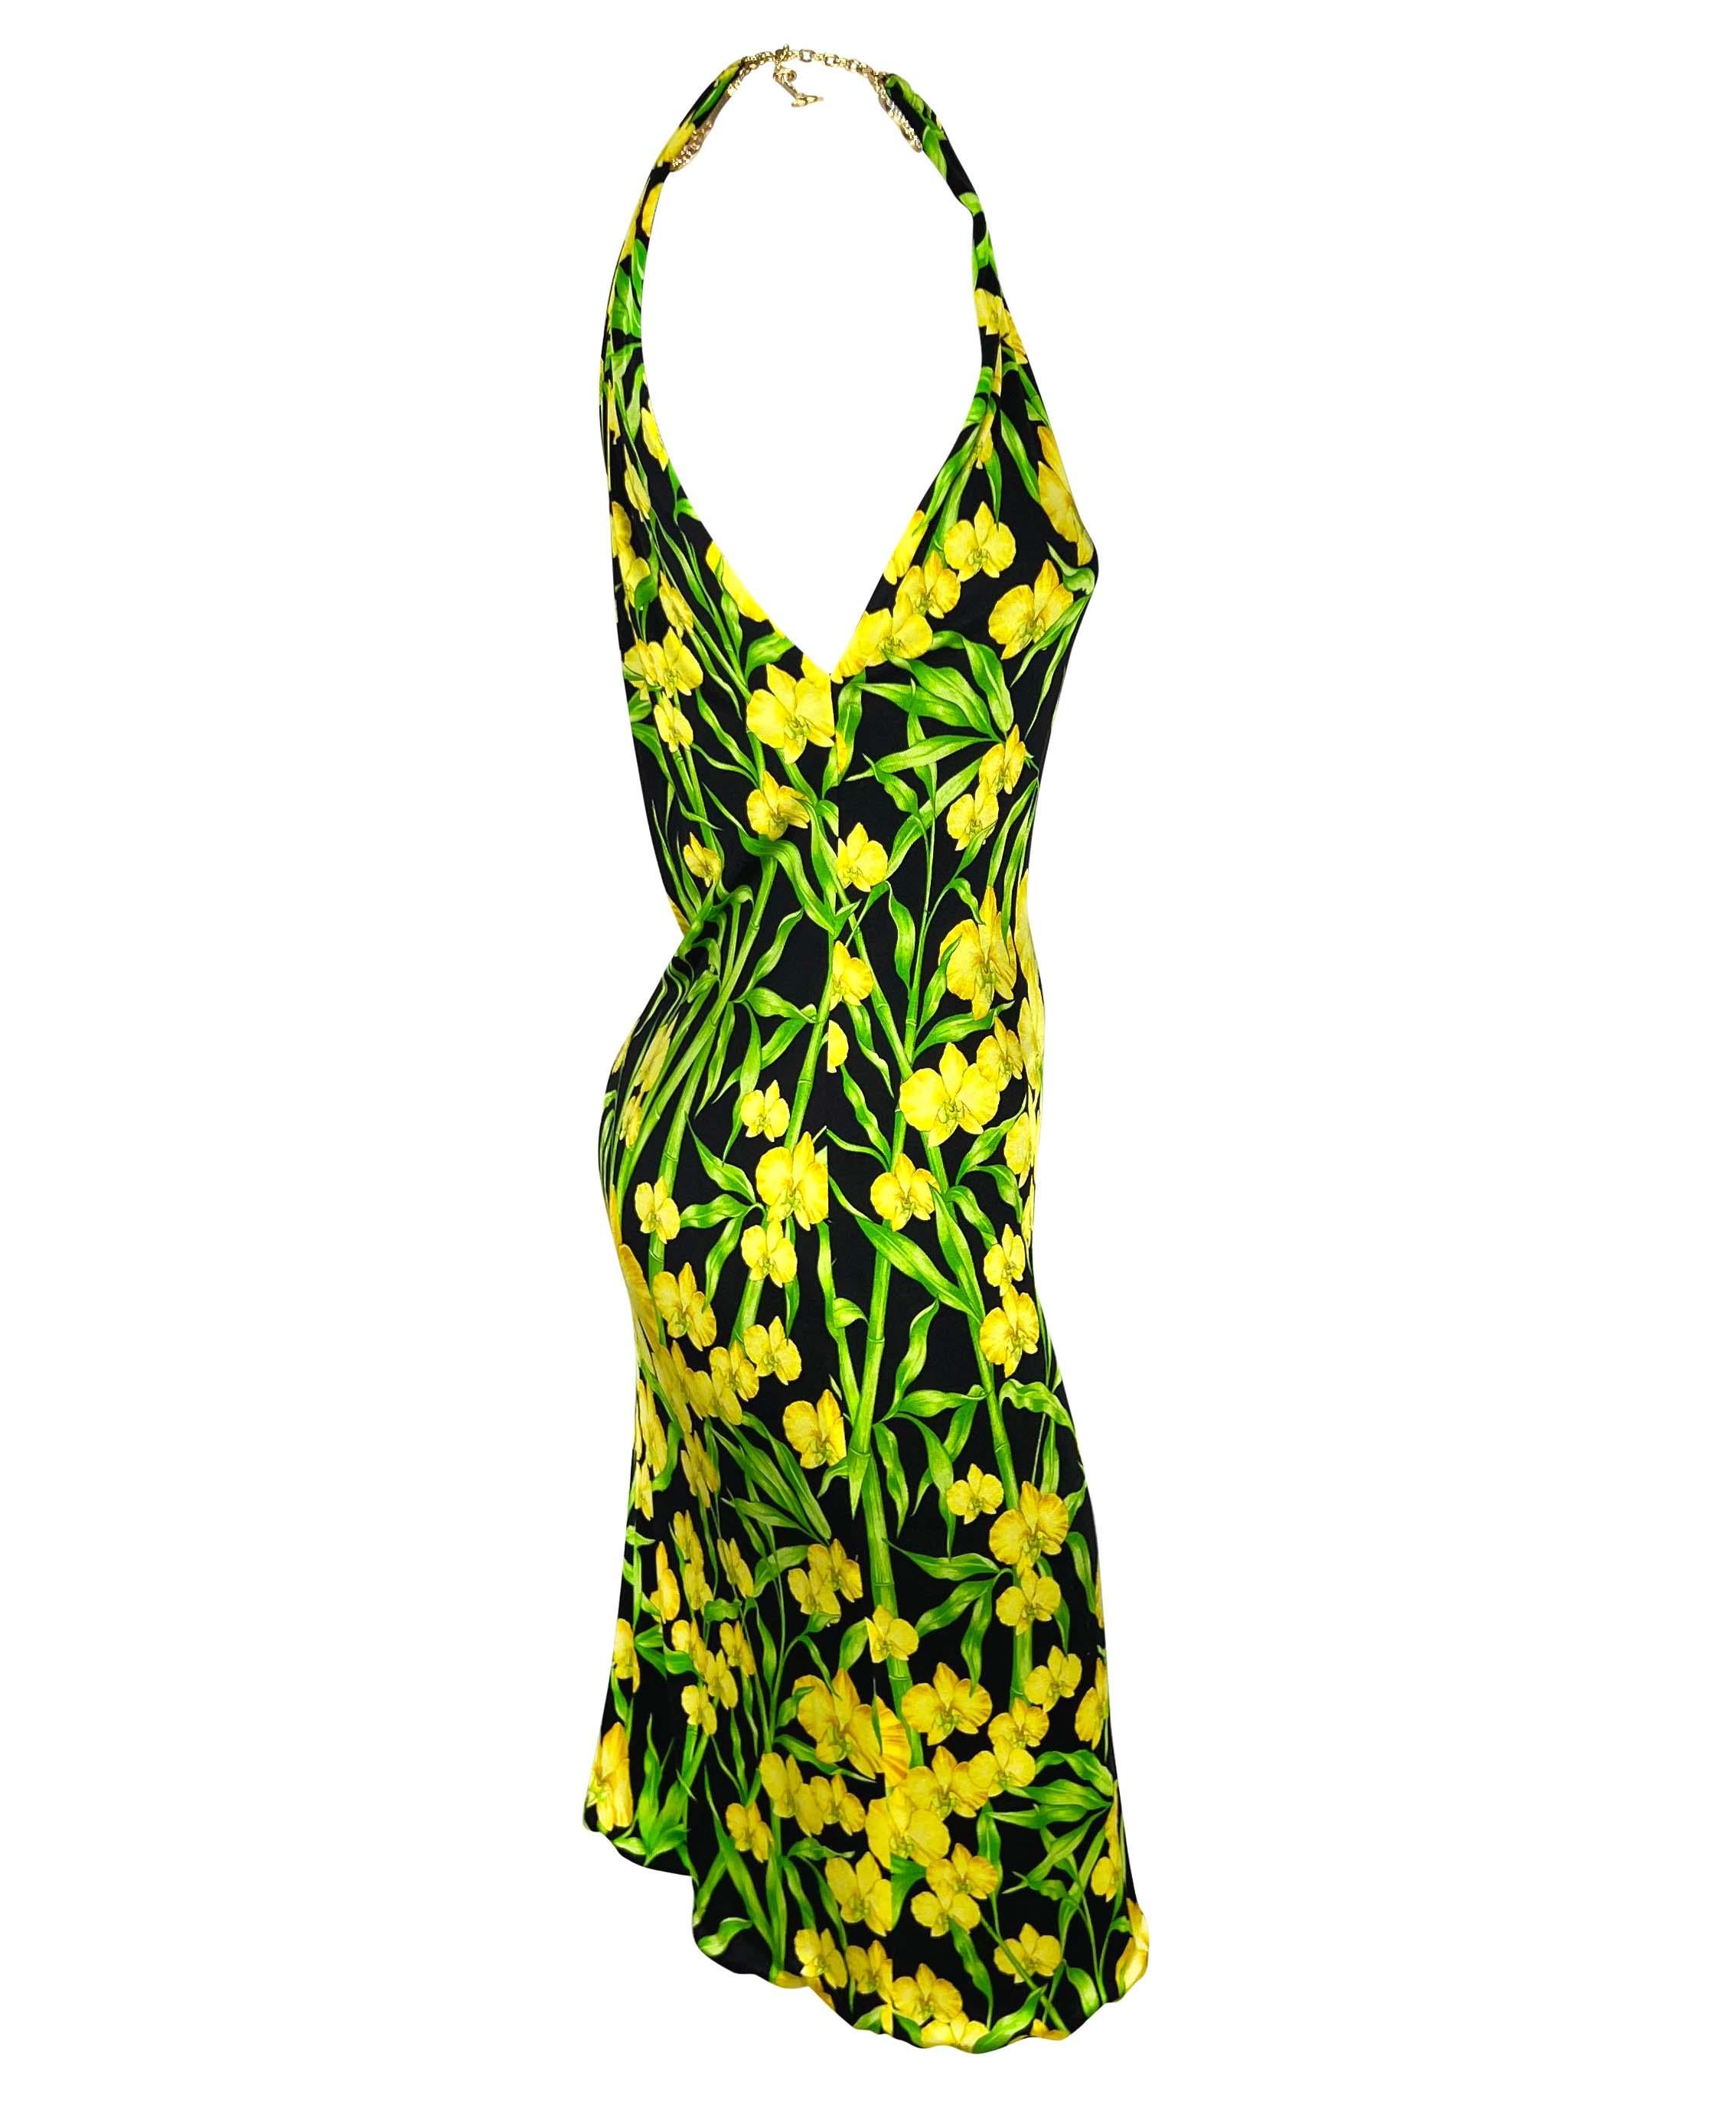 S/S 2000 Gianni Versace by Donatella Jungle Yellow Orchid Stretch Charm Dress In Good Condition For Sale In West Hollywood, CA